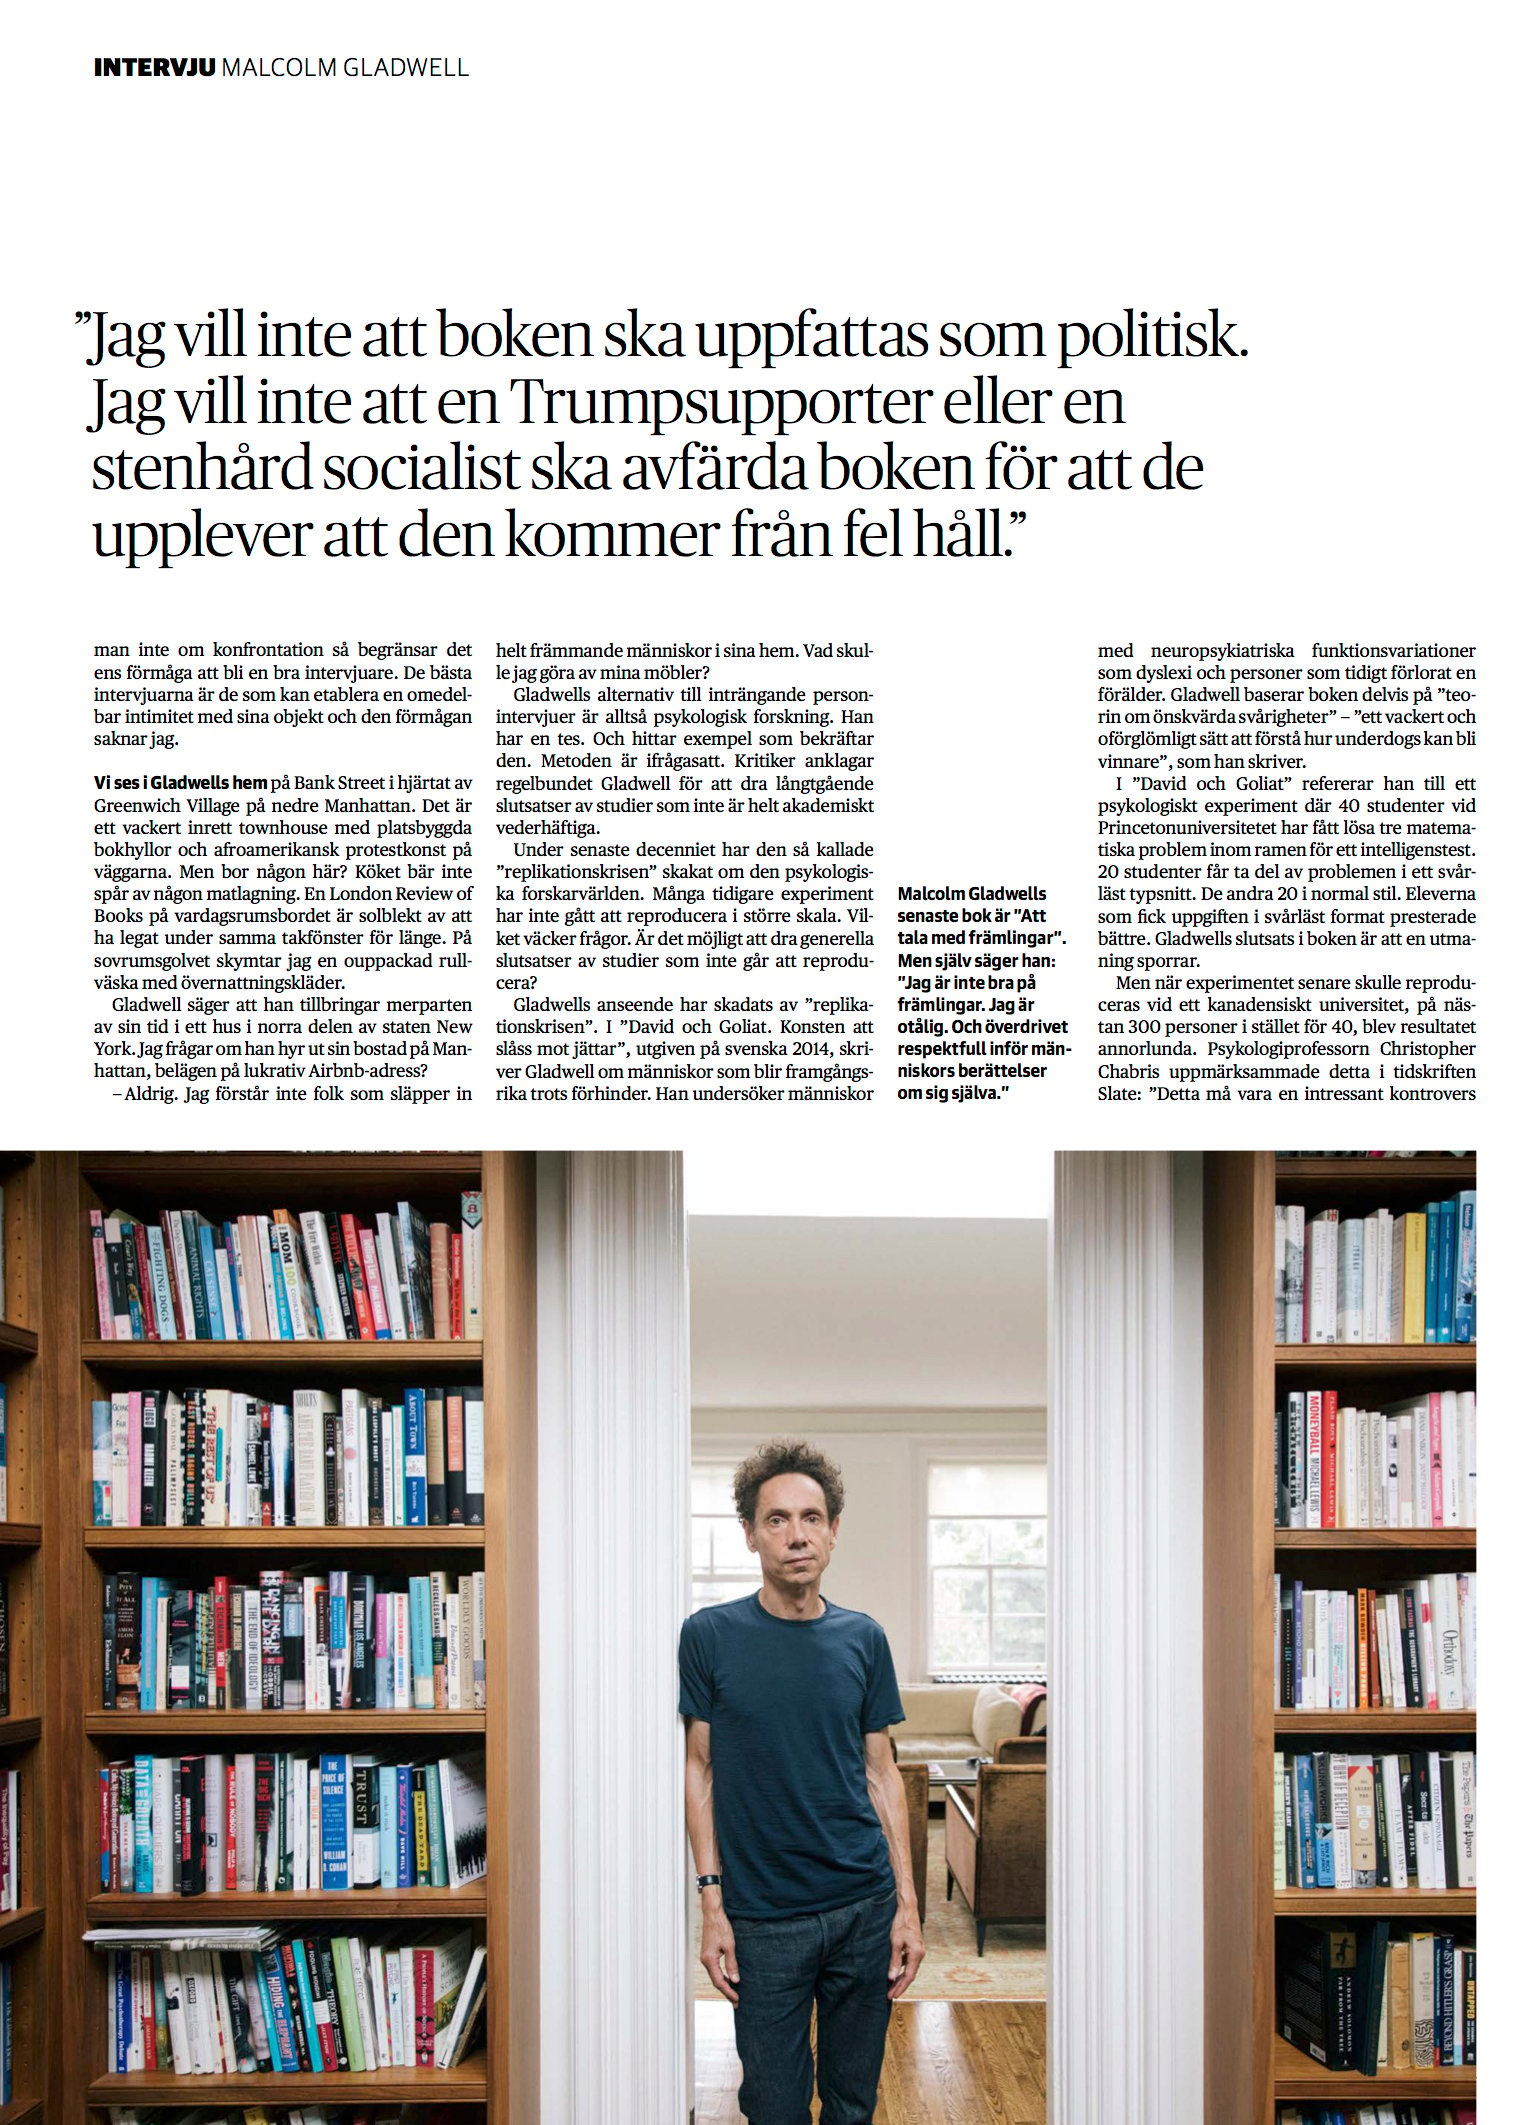 Tear sheet of Malcolm Gladwell standing in a doorway of his office.